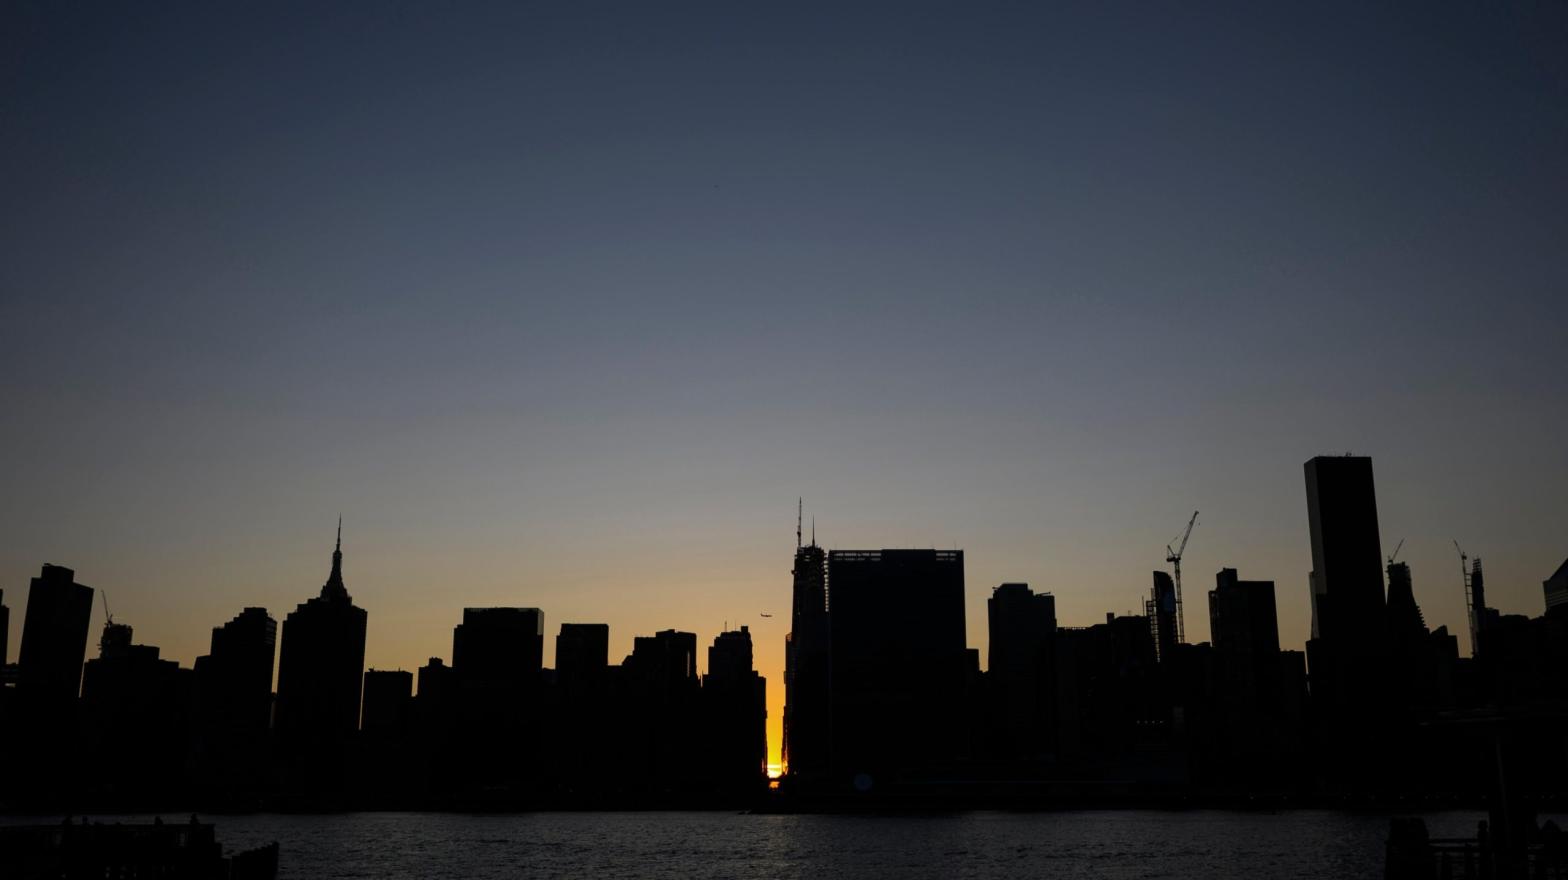 The sun sets behind 42nd Street in Manhattan during a power outage in New York City on July 13, 2019. A similar scene could play out on Wednesday as extreme heat strains the grid. (Photo: Johannes Eisele, Getty Images)